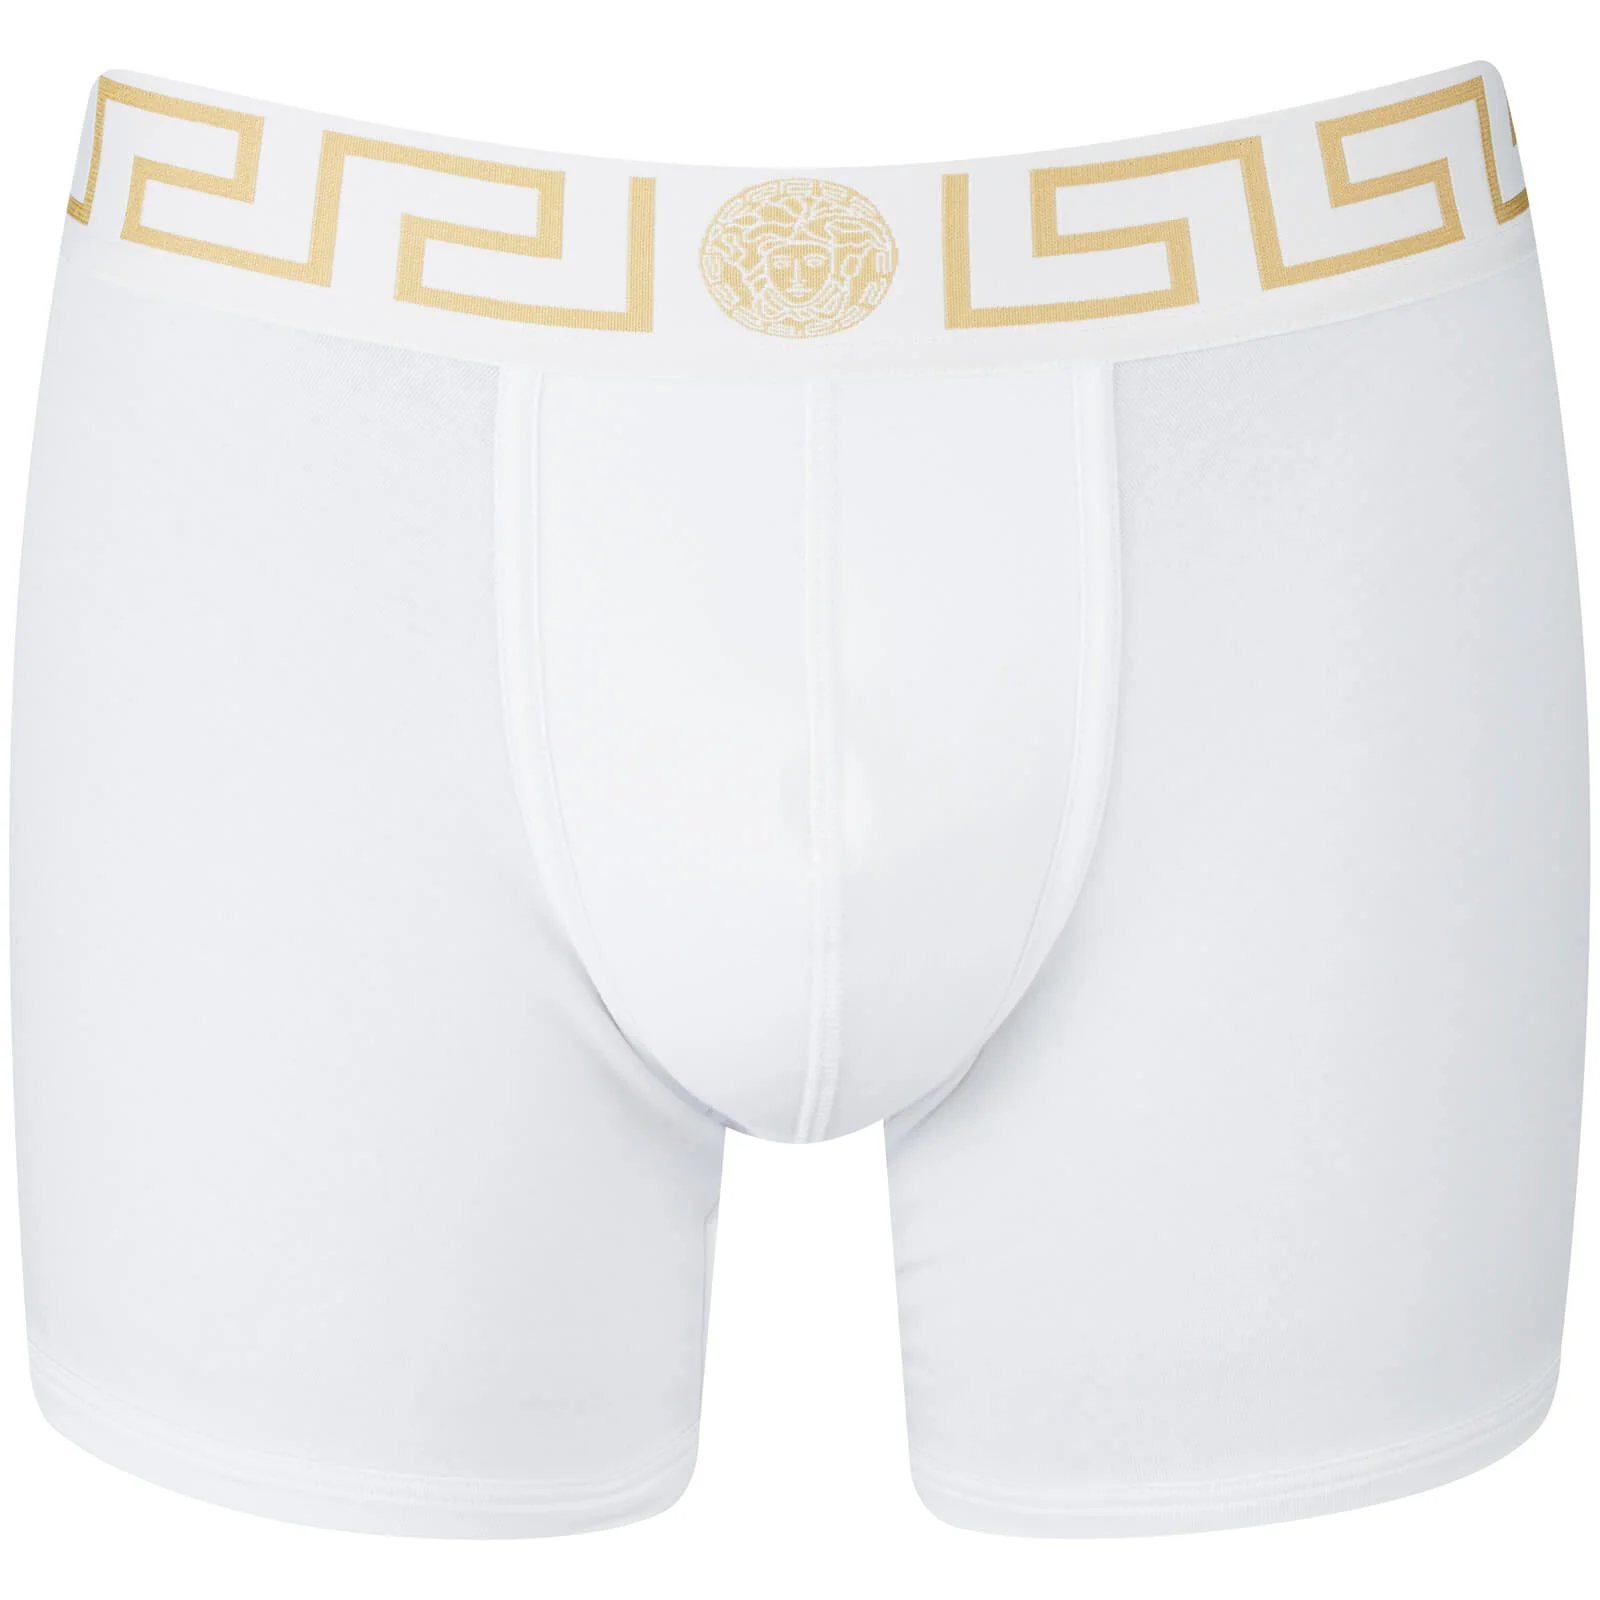 Versace Collection Men's Iconic Trunk Boxer Shorts - White Image 1